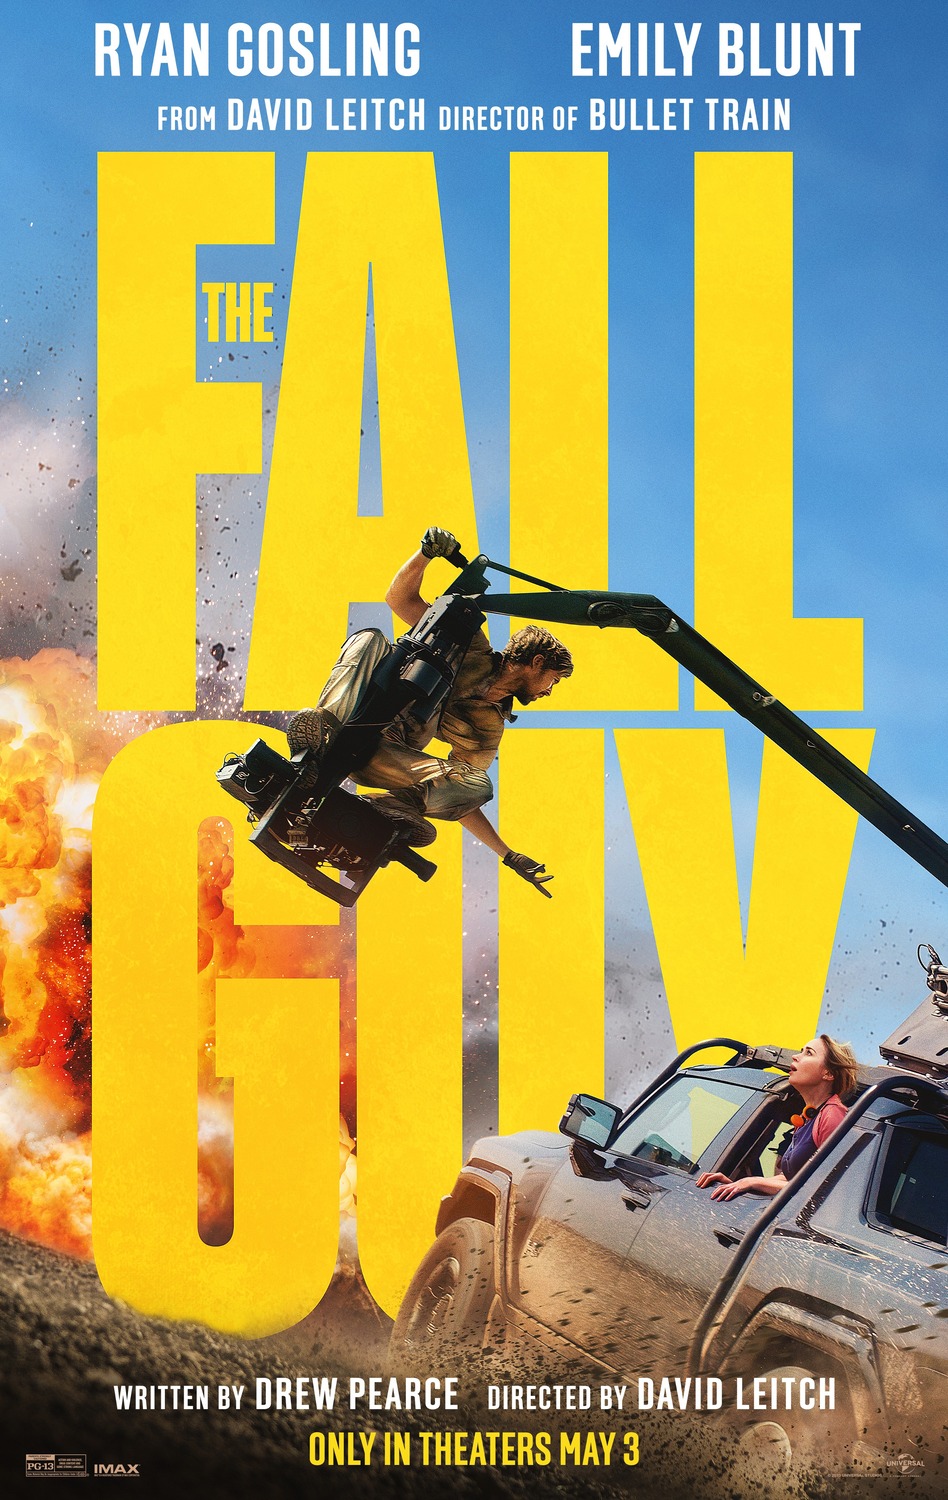 The Fall Guy Posters and Photos 231425